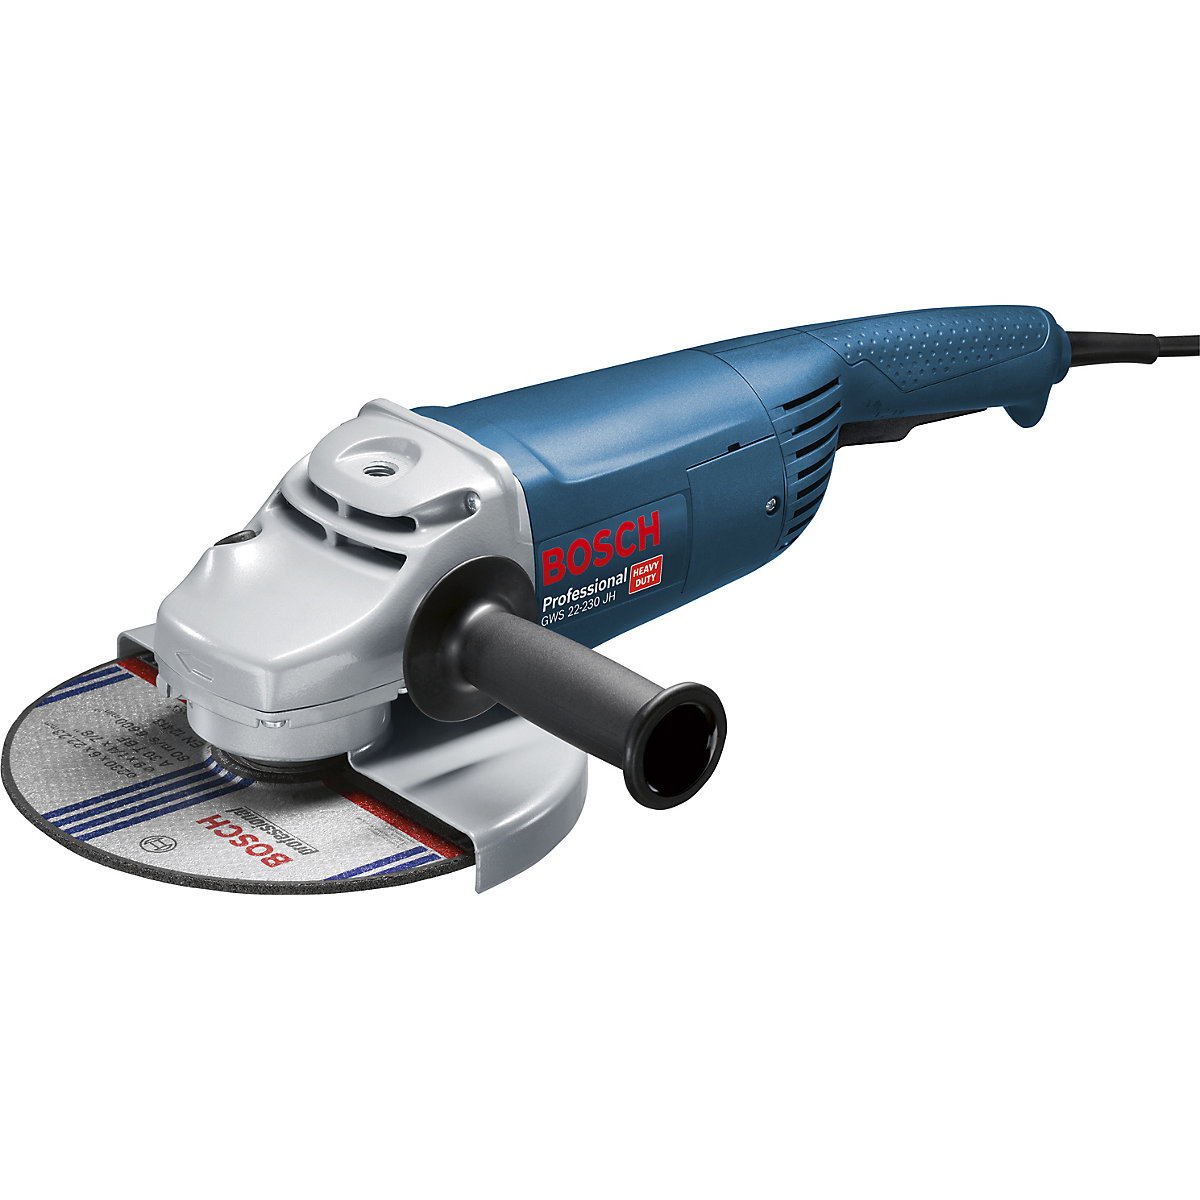 GWS 22-230 JH Professional angle grinder – Bosch